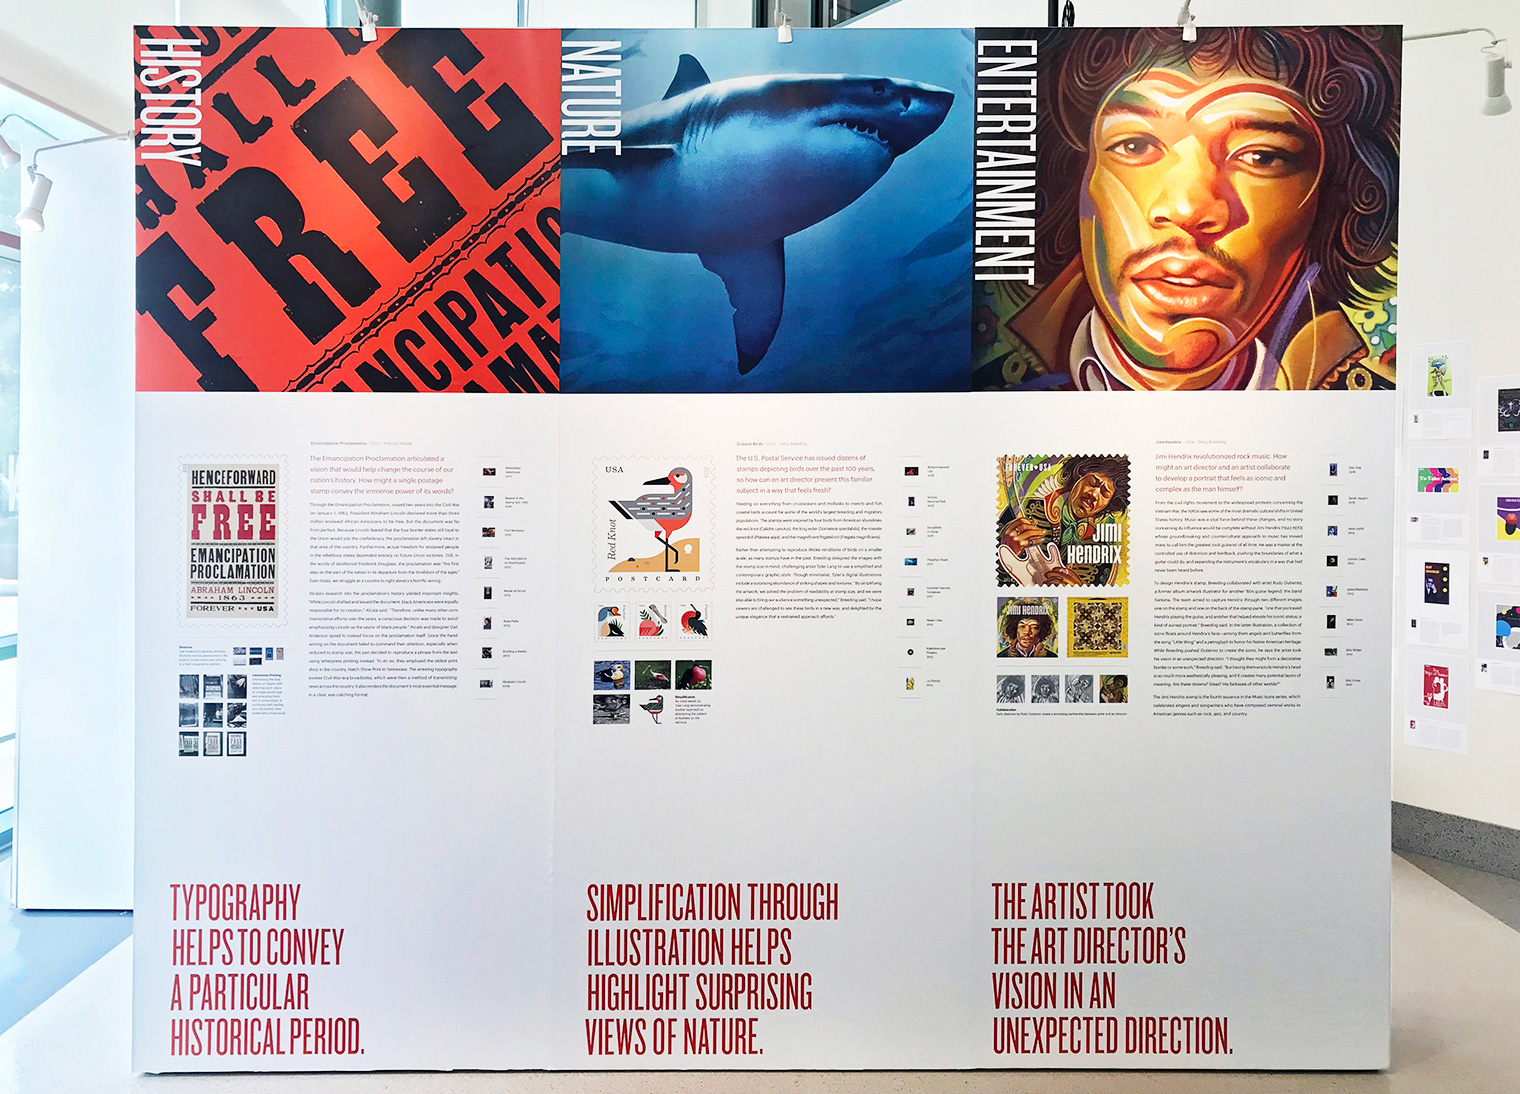 These panels highlight History, Nature, and Entertainment such as the Emancipation Proclamation, Sharks, and Jimi Hendrix.